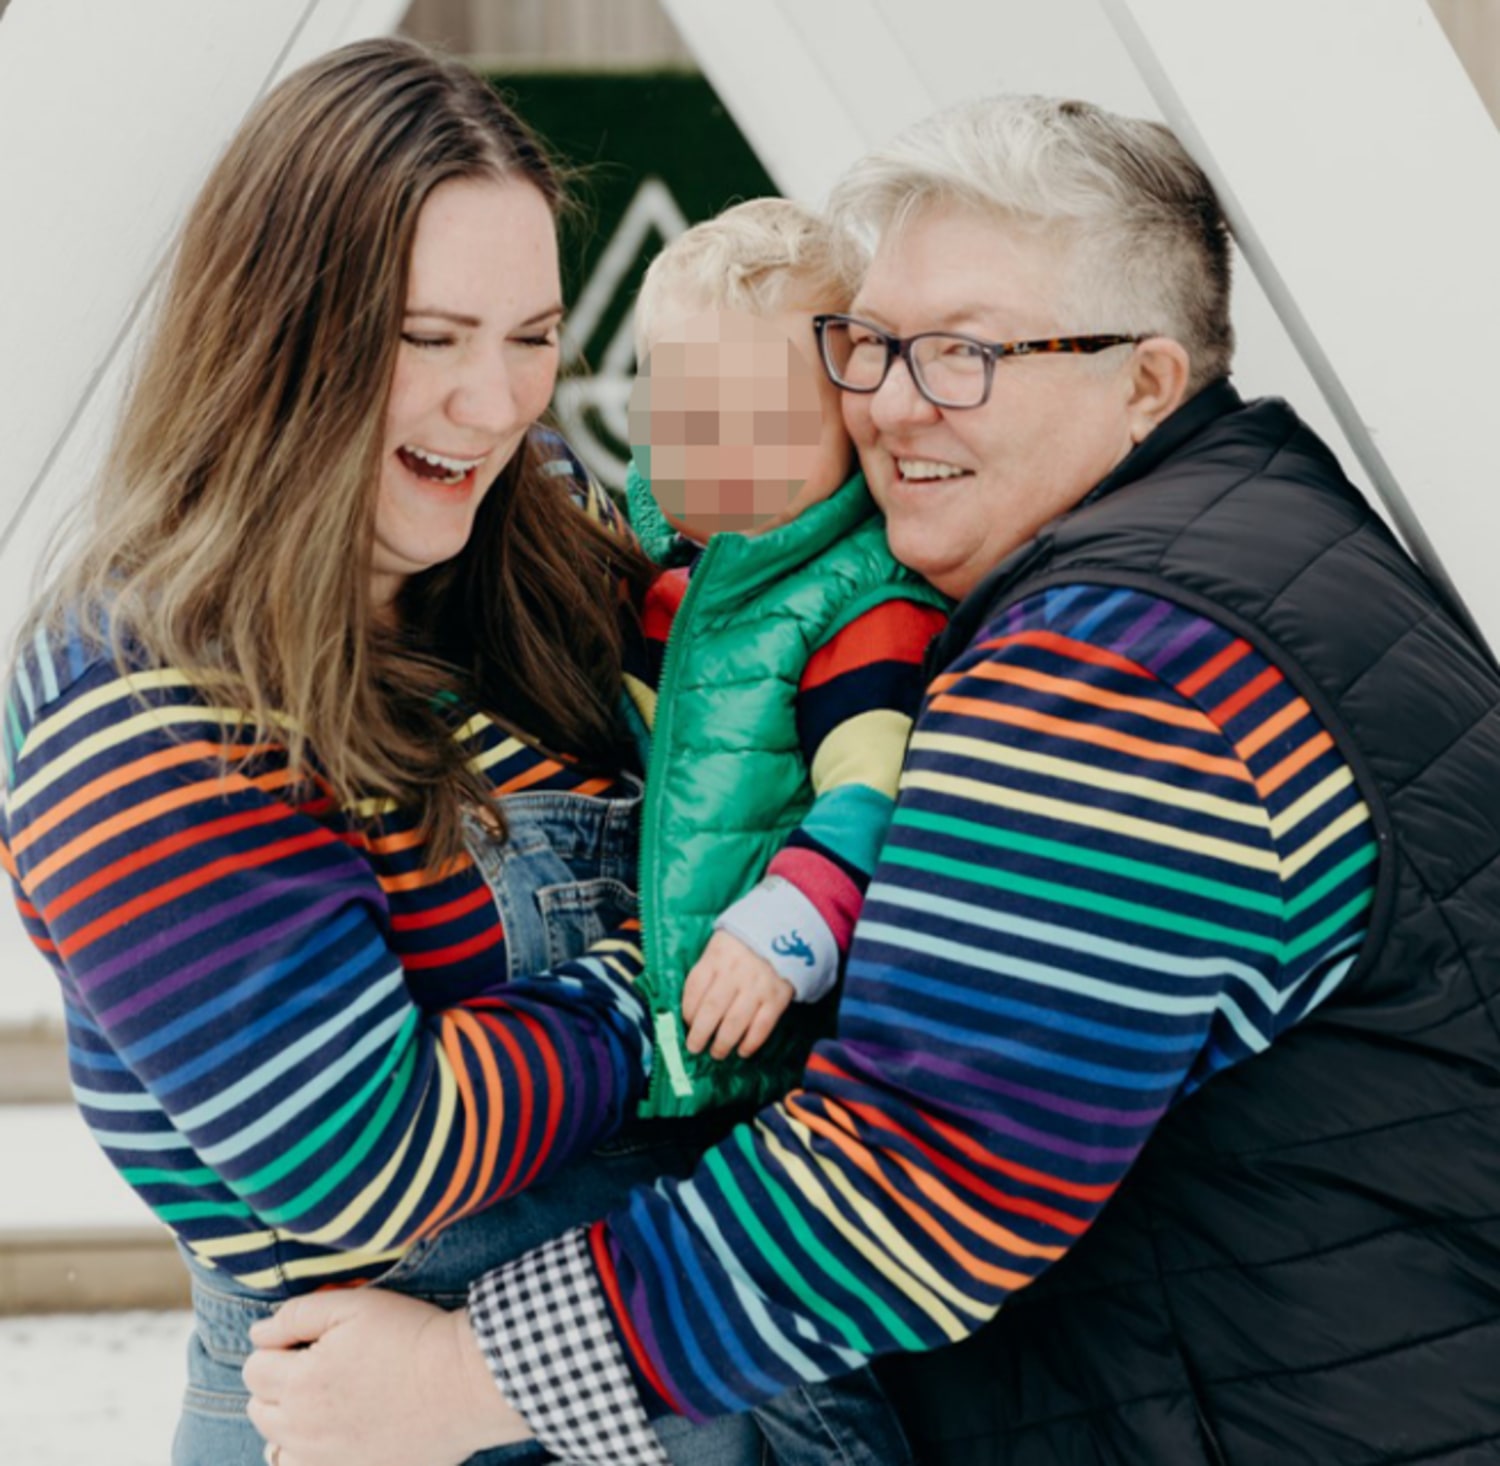 Lesbian mom loses parental rights, and wife, to sperm donor pic